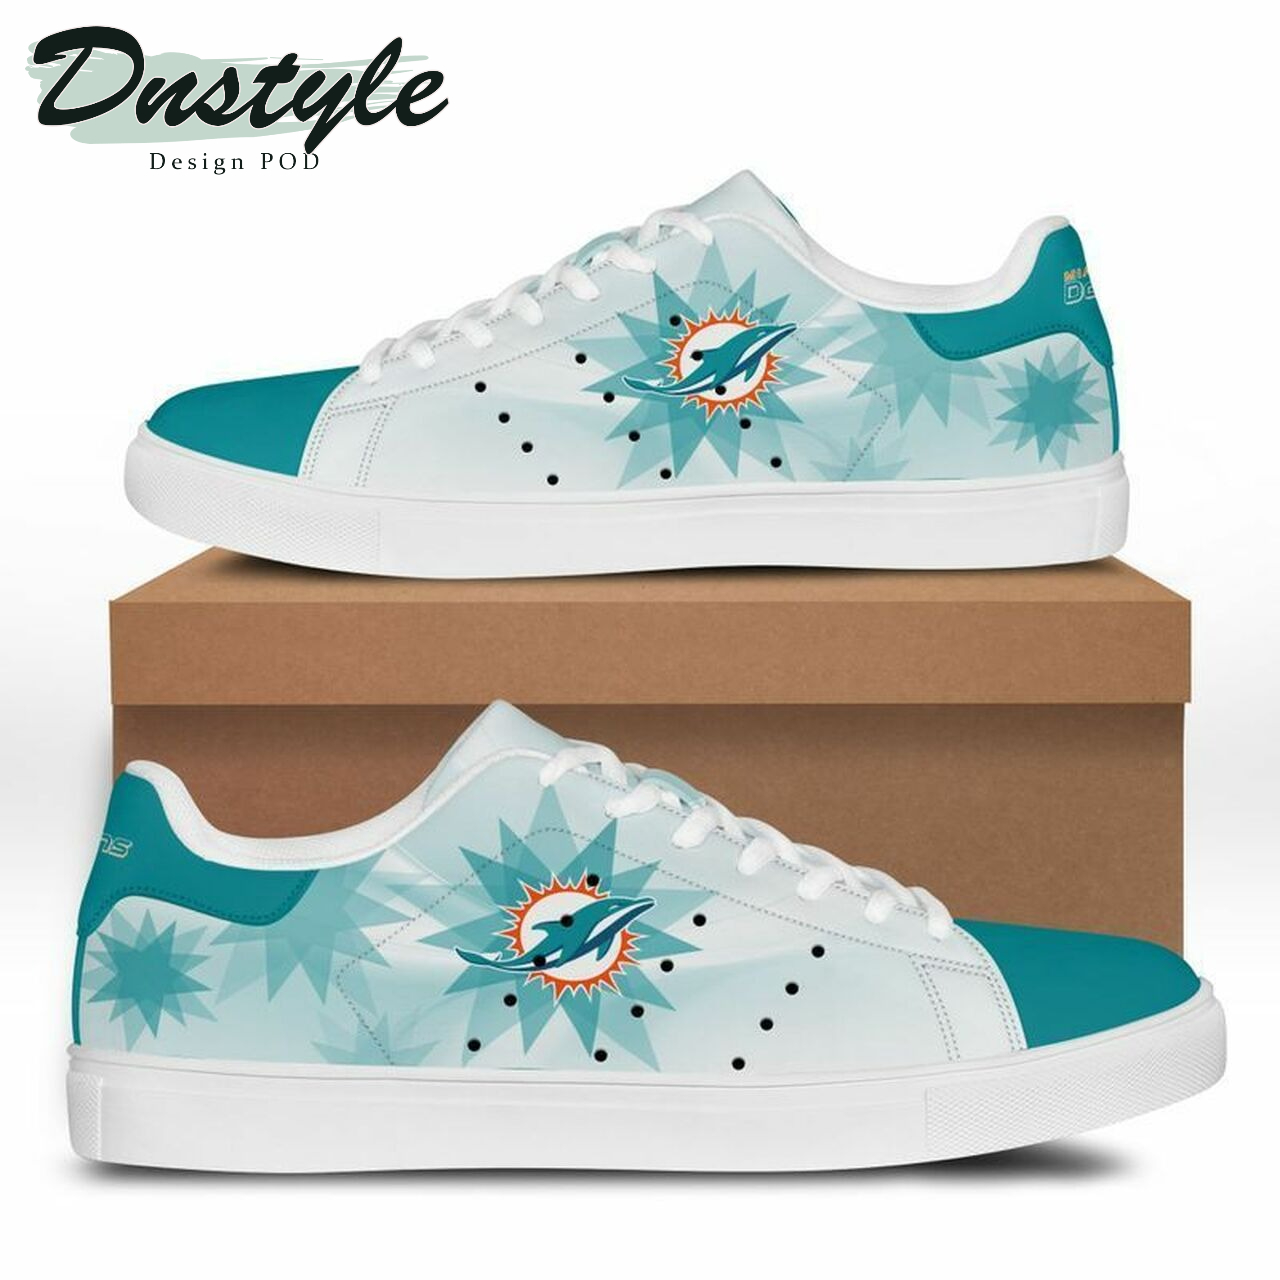 NFL stan smith low top skate shoes miami dolphins